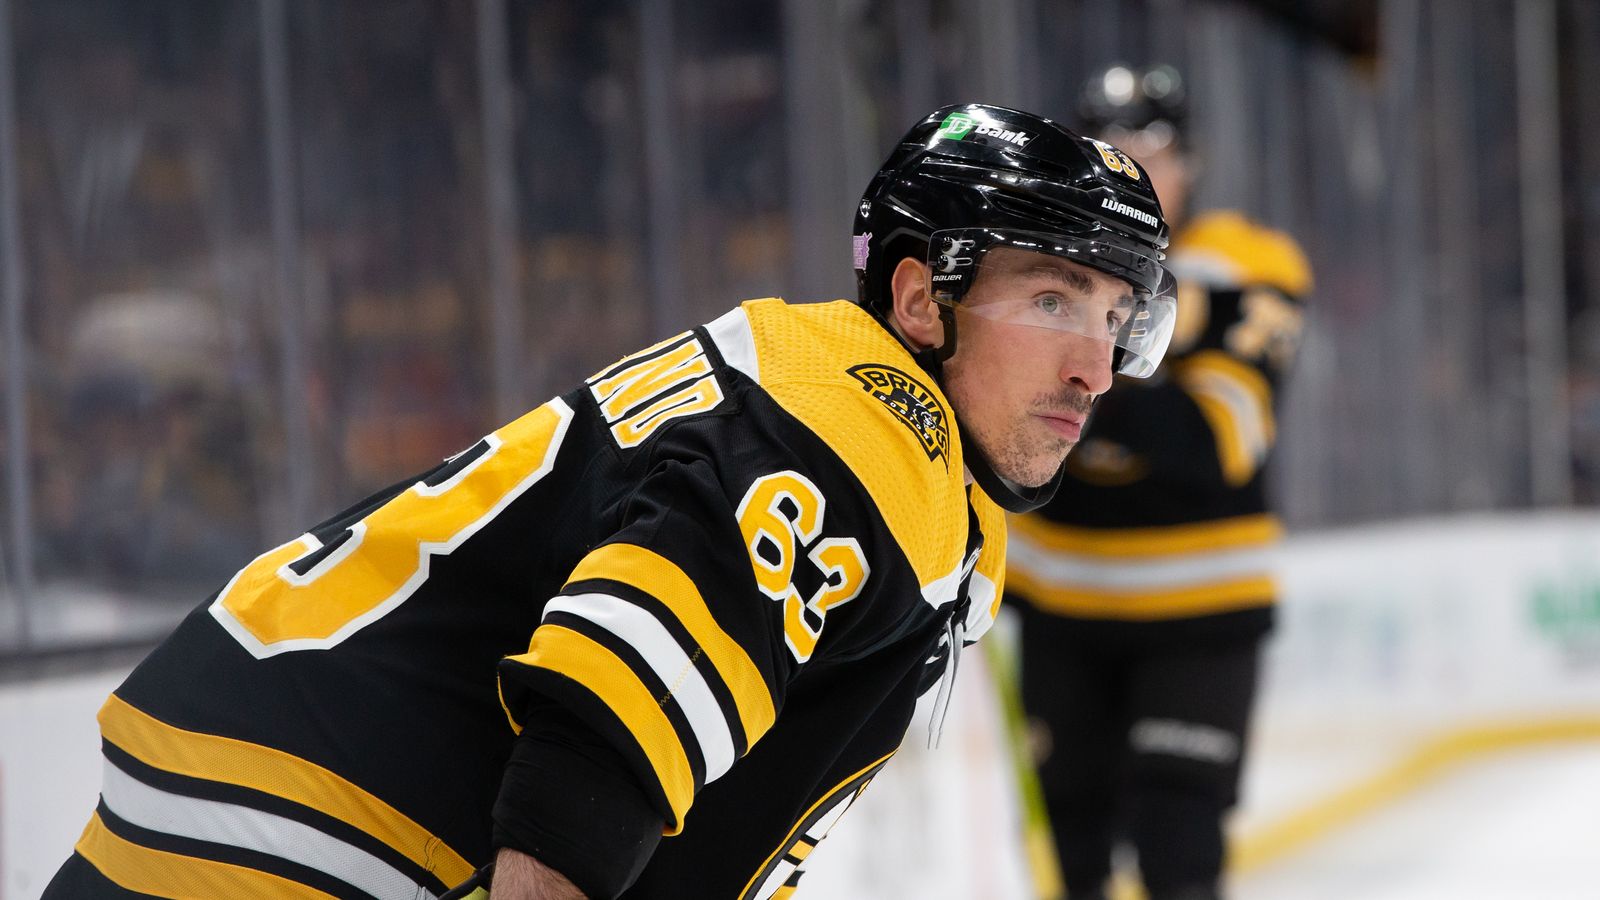 Marchand up to speed